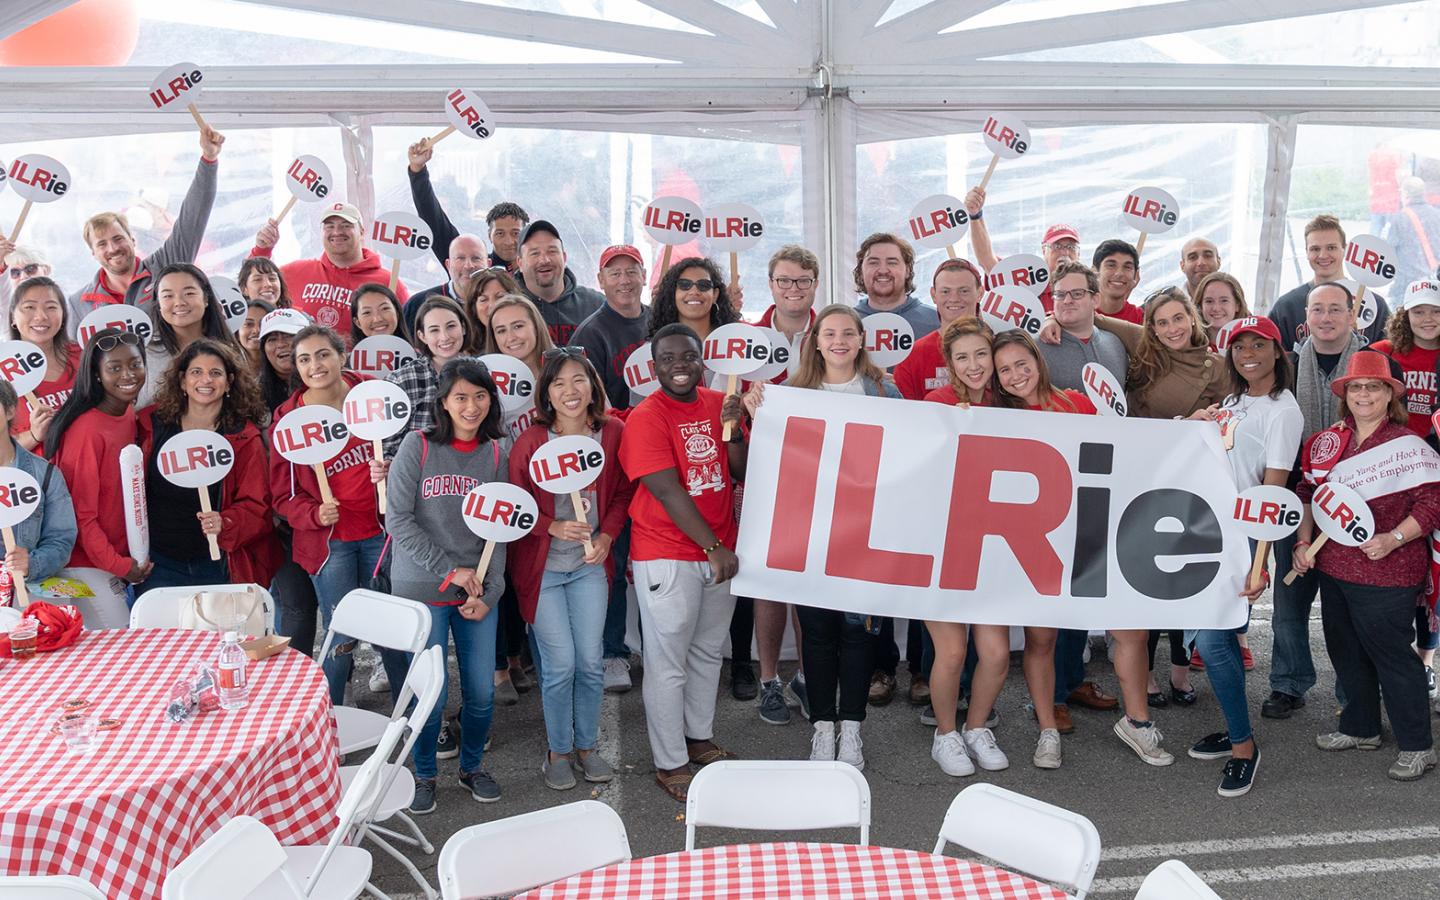 ILR Alumni under a big tent holding up an ILRie banner